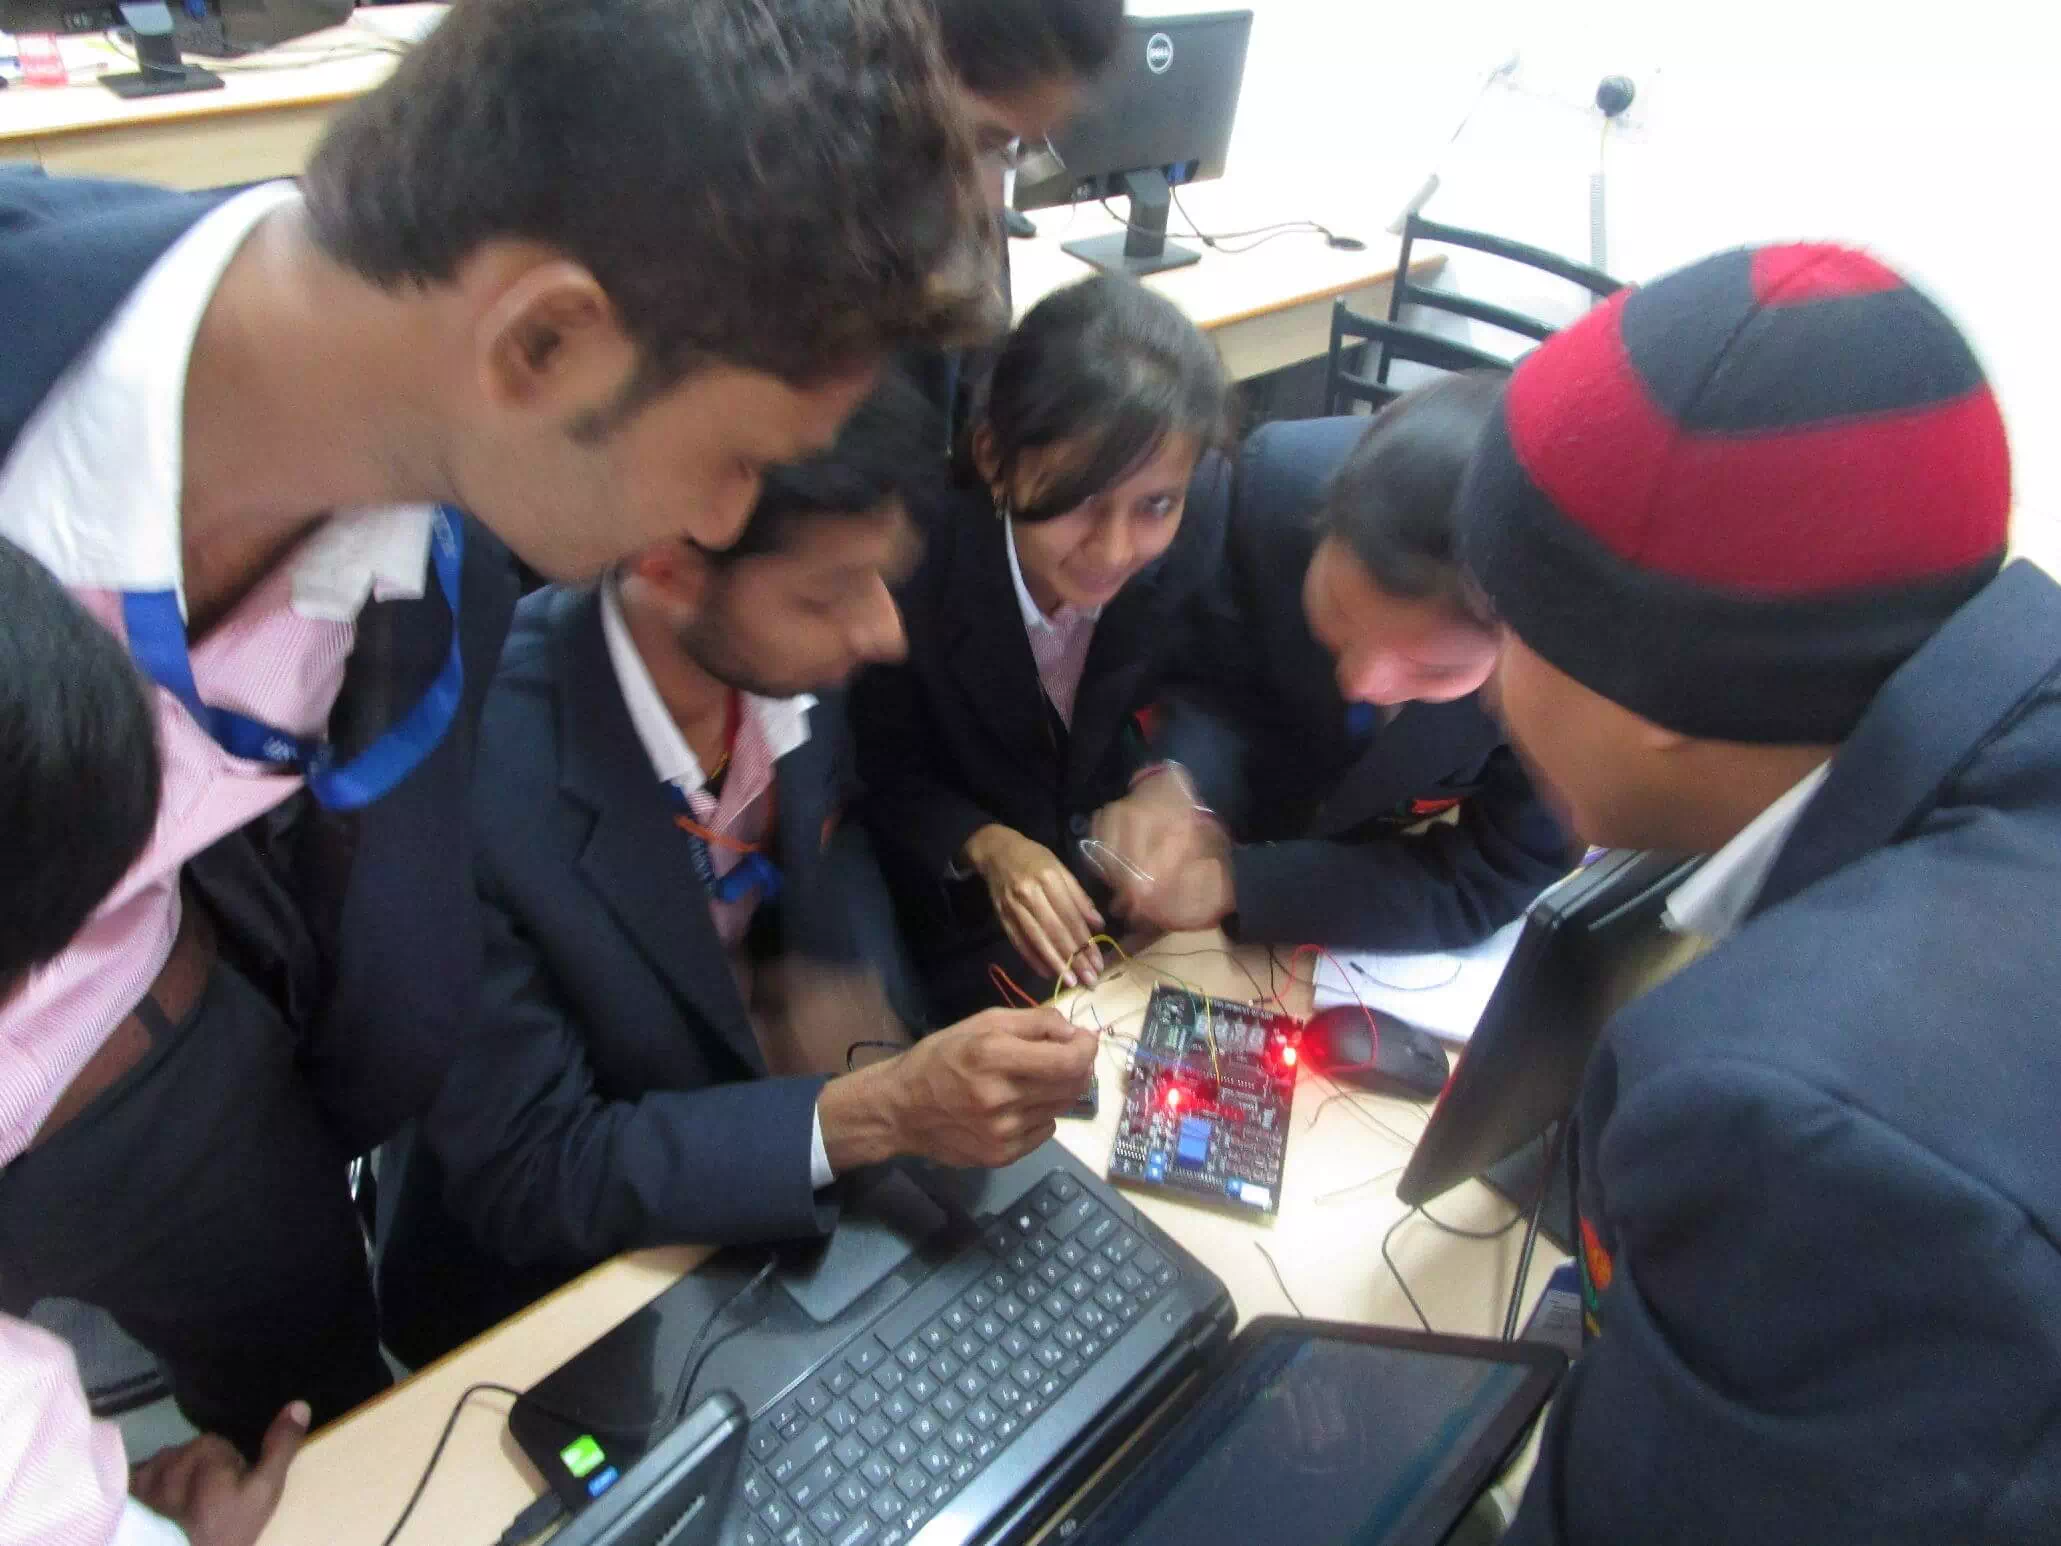  Workshop on Product designing with Arduino and Industrial Automation